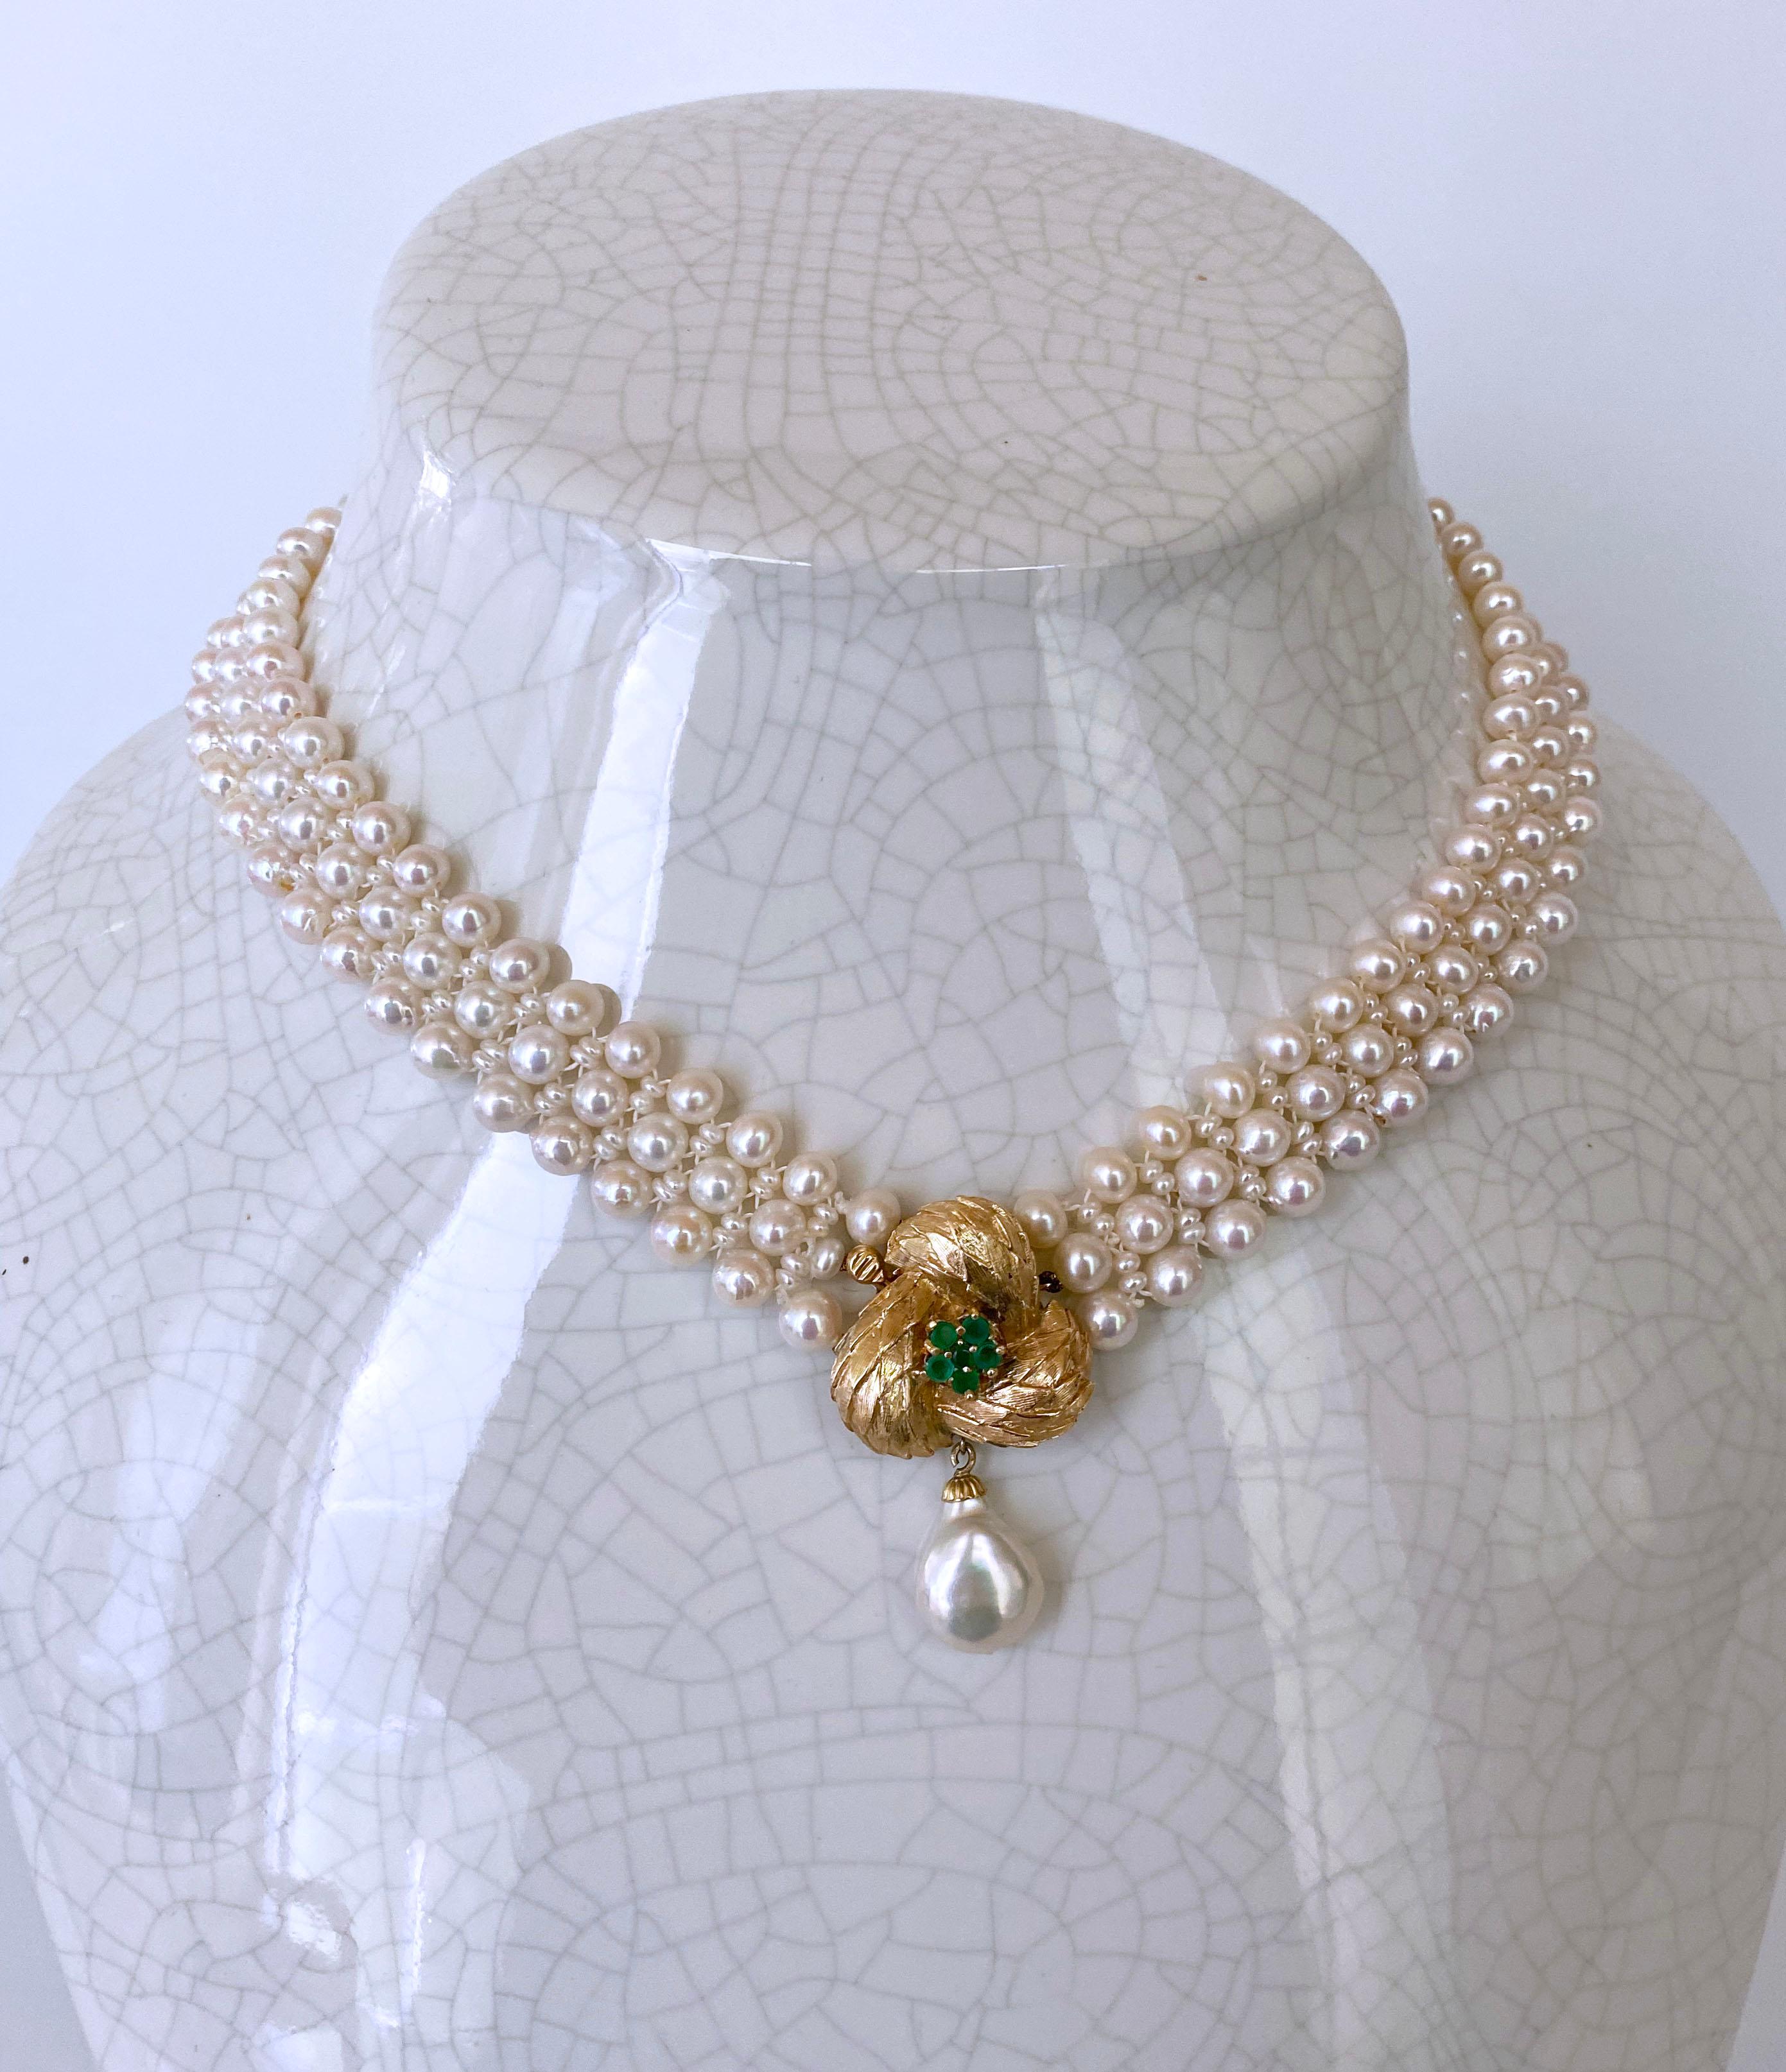 Marina J. Pearl Necklace with Vintage 14k Yellow Gold and Emerald Center-Clasp For Sale 6